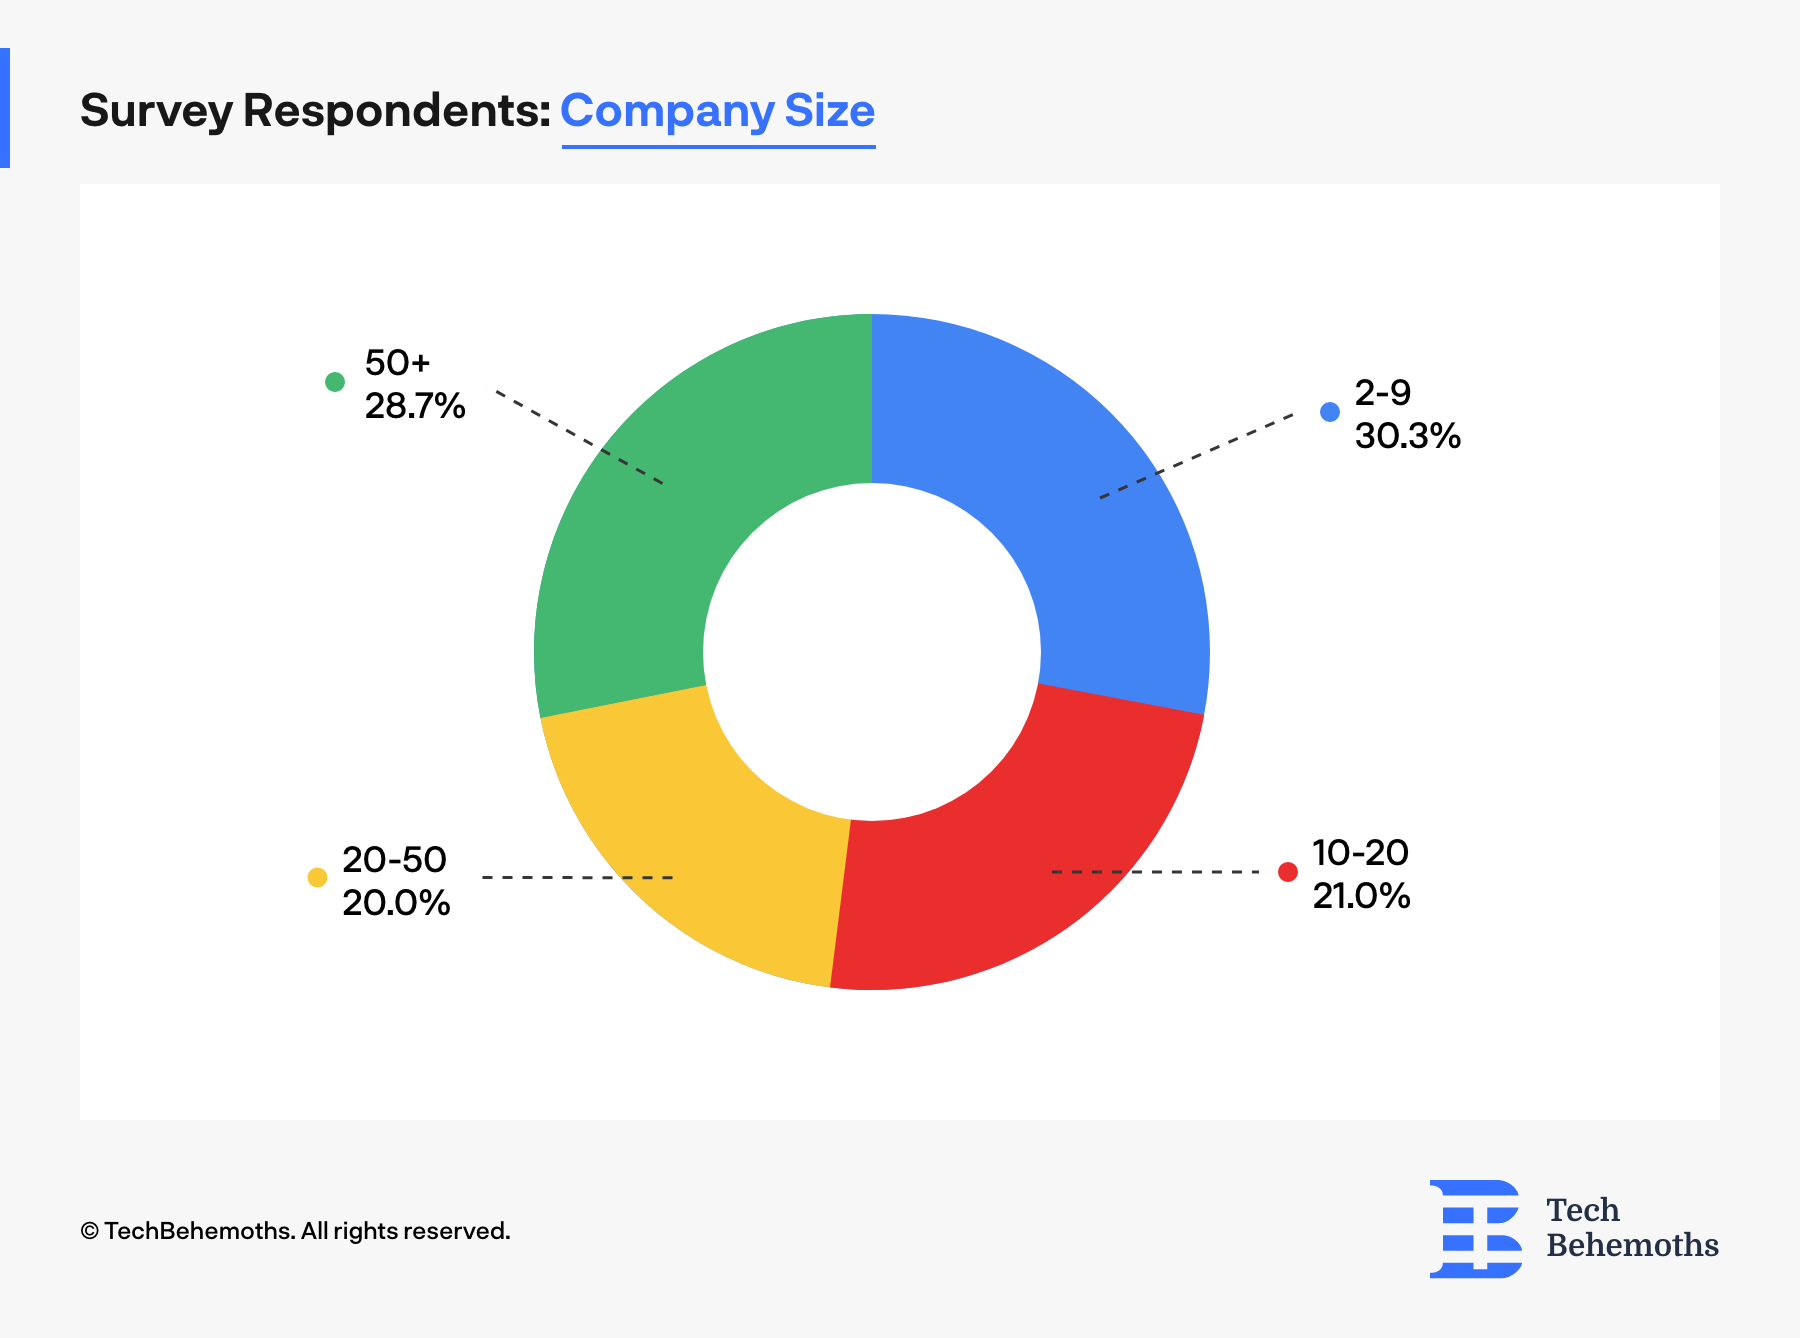 The company size survey respondents come from